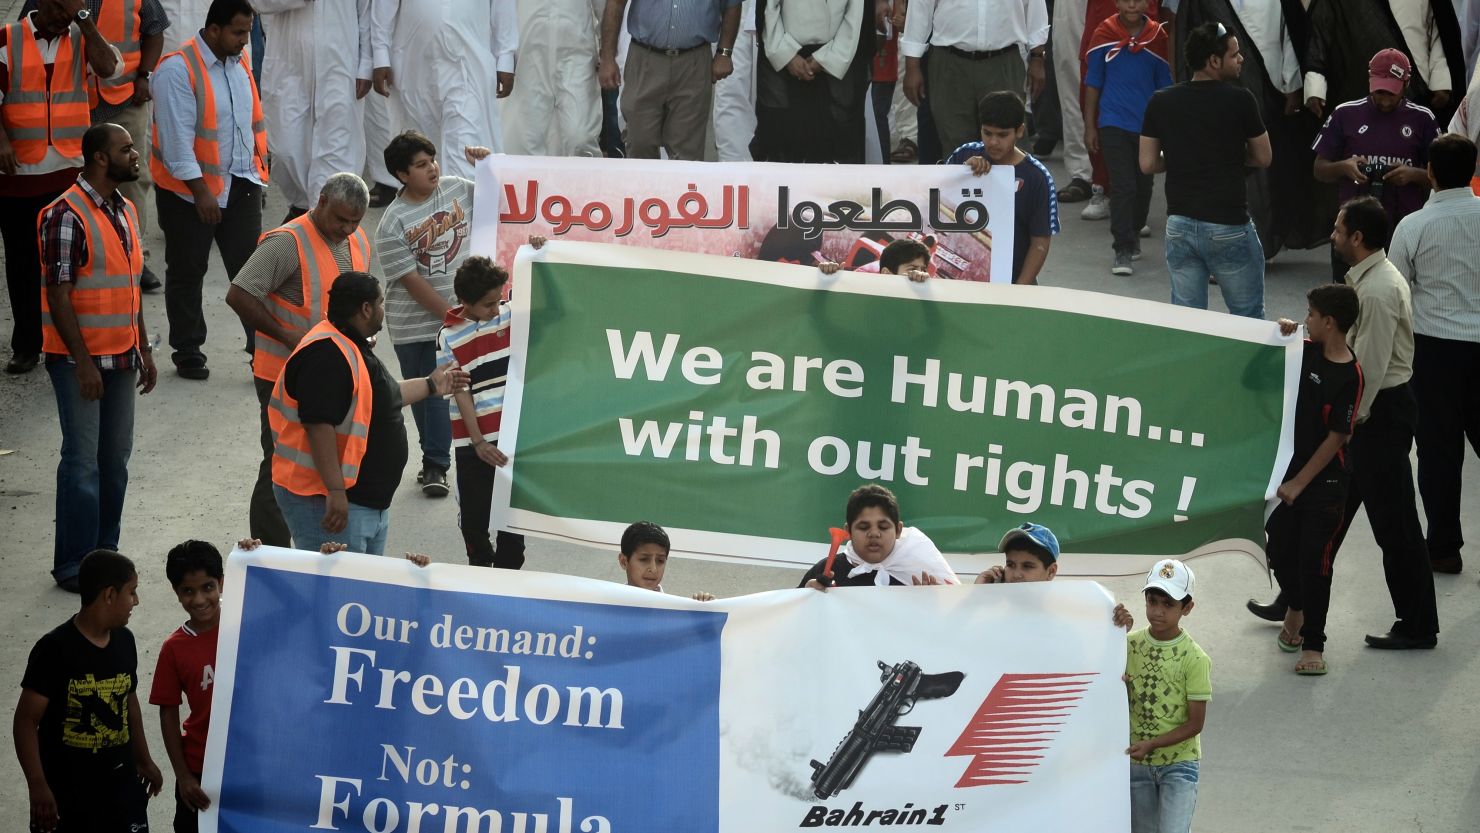 Protestors in the northern town of Al Dair show their opposition to the upcoming Formula One Bahrain Grand Prix 